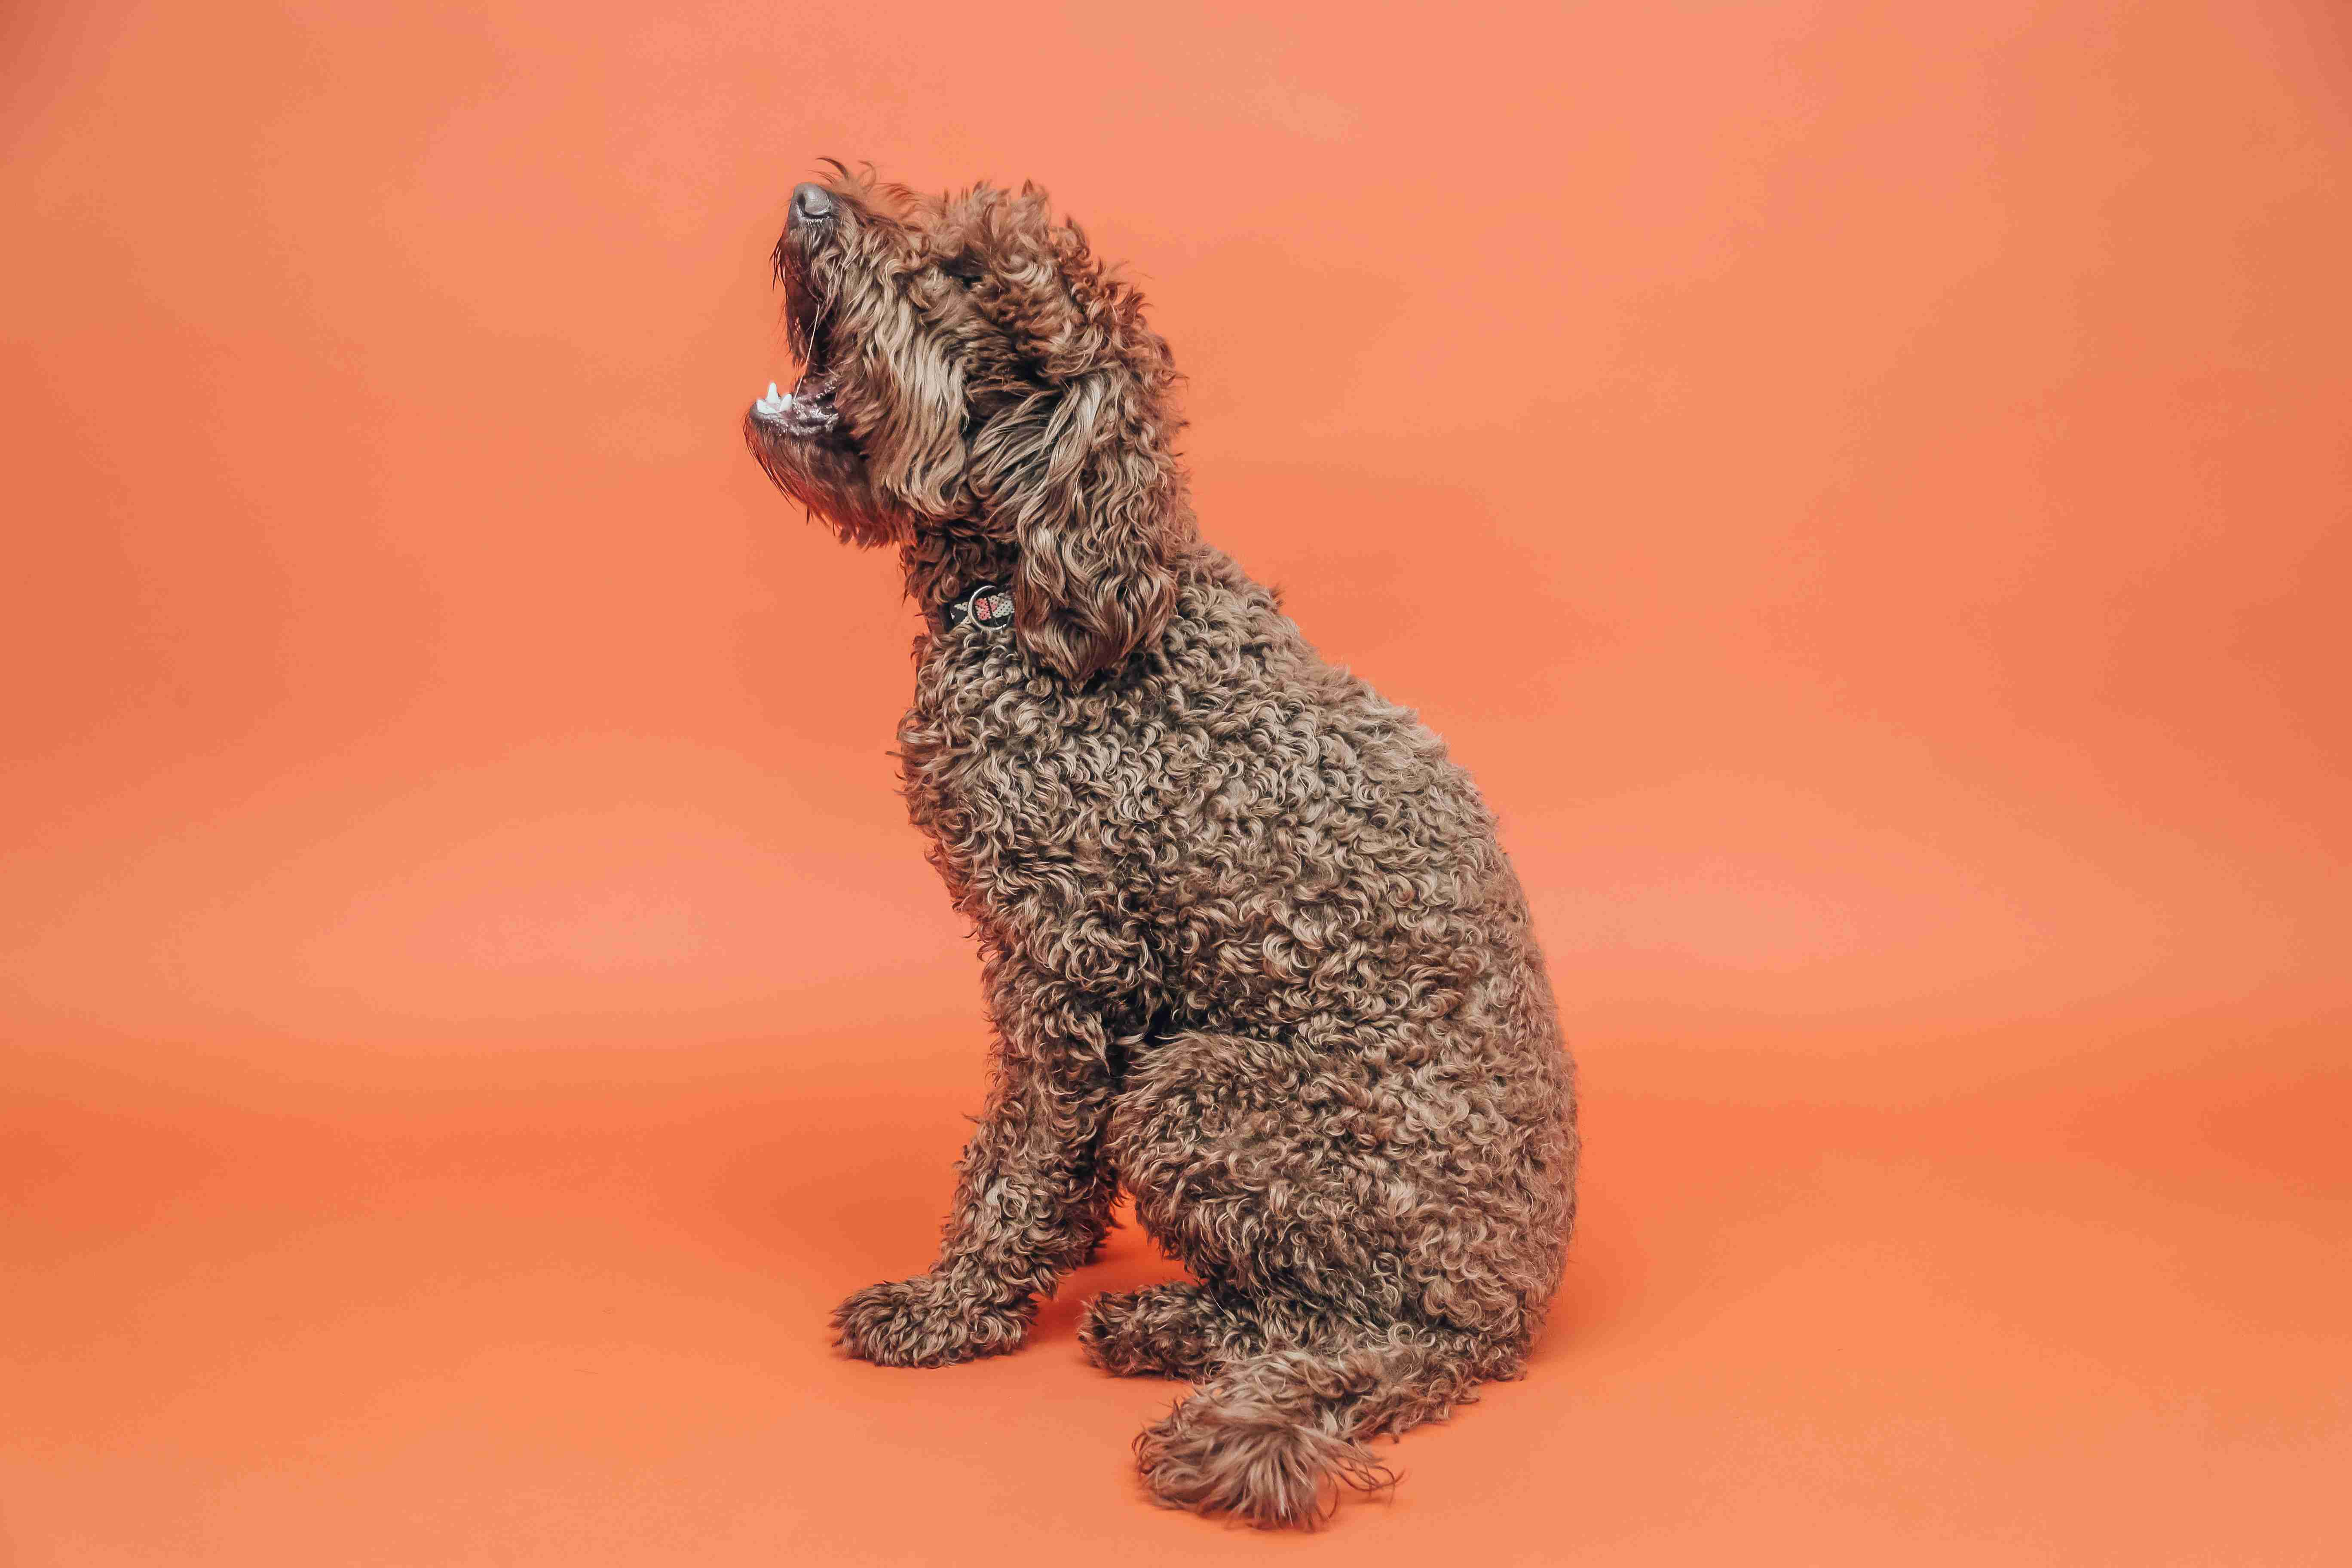 Are Poodles at risk of developing skin tumors or growths? What treatment options exist for such conditions?